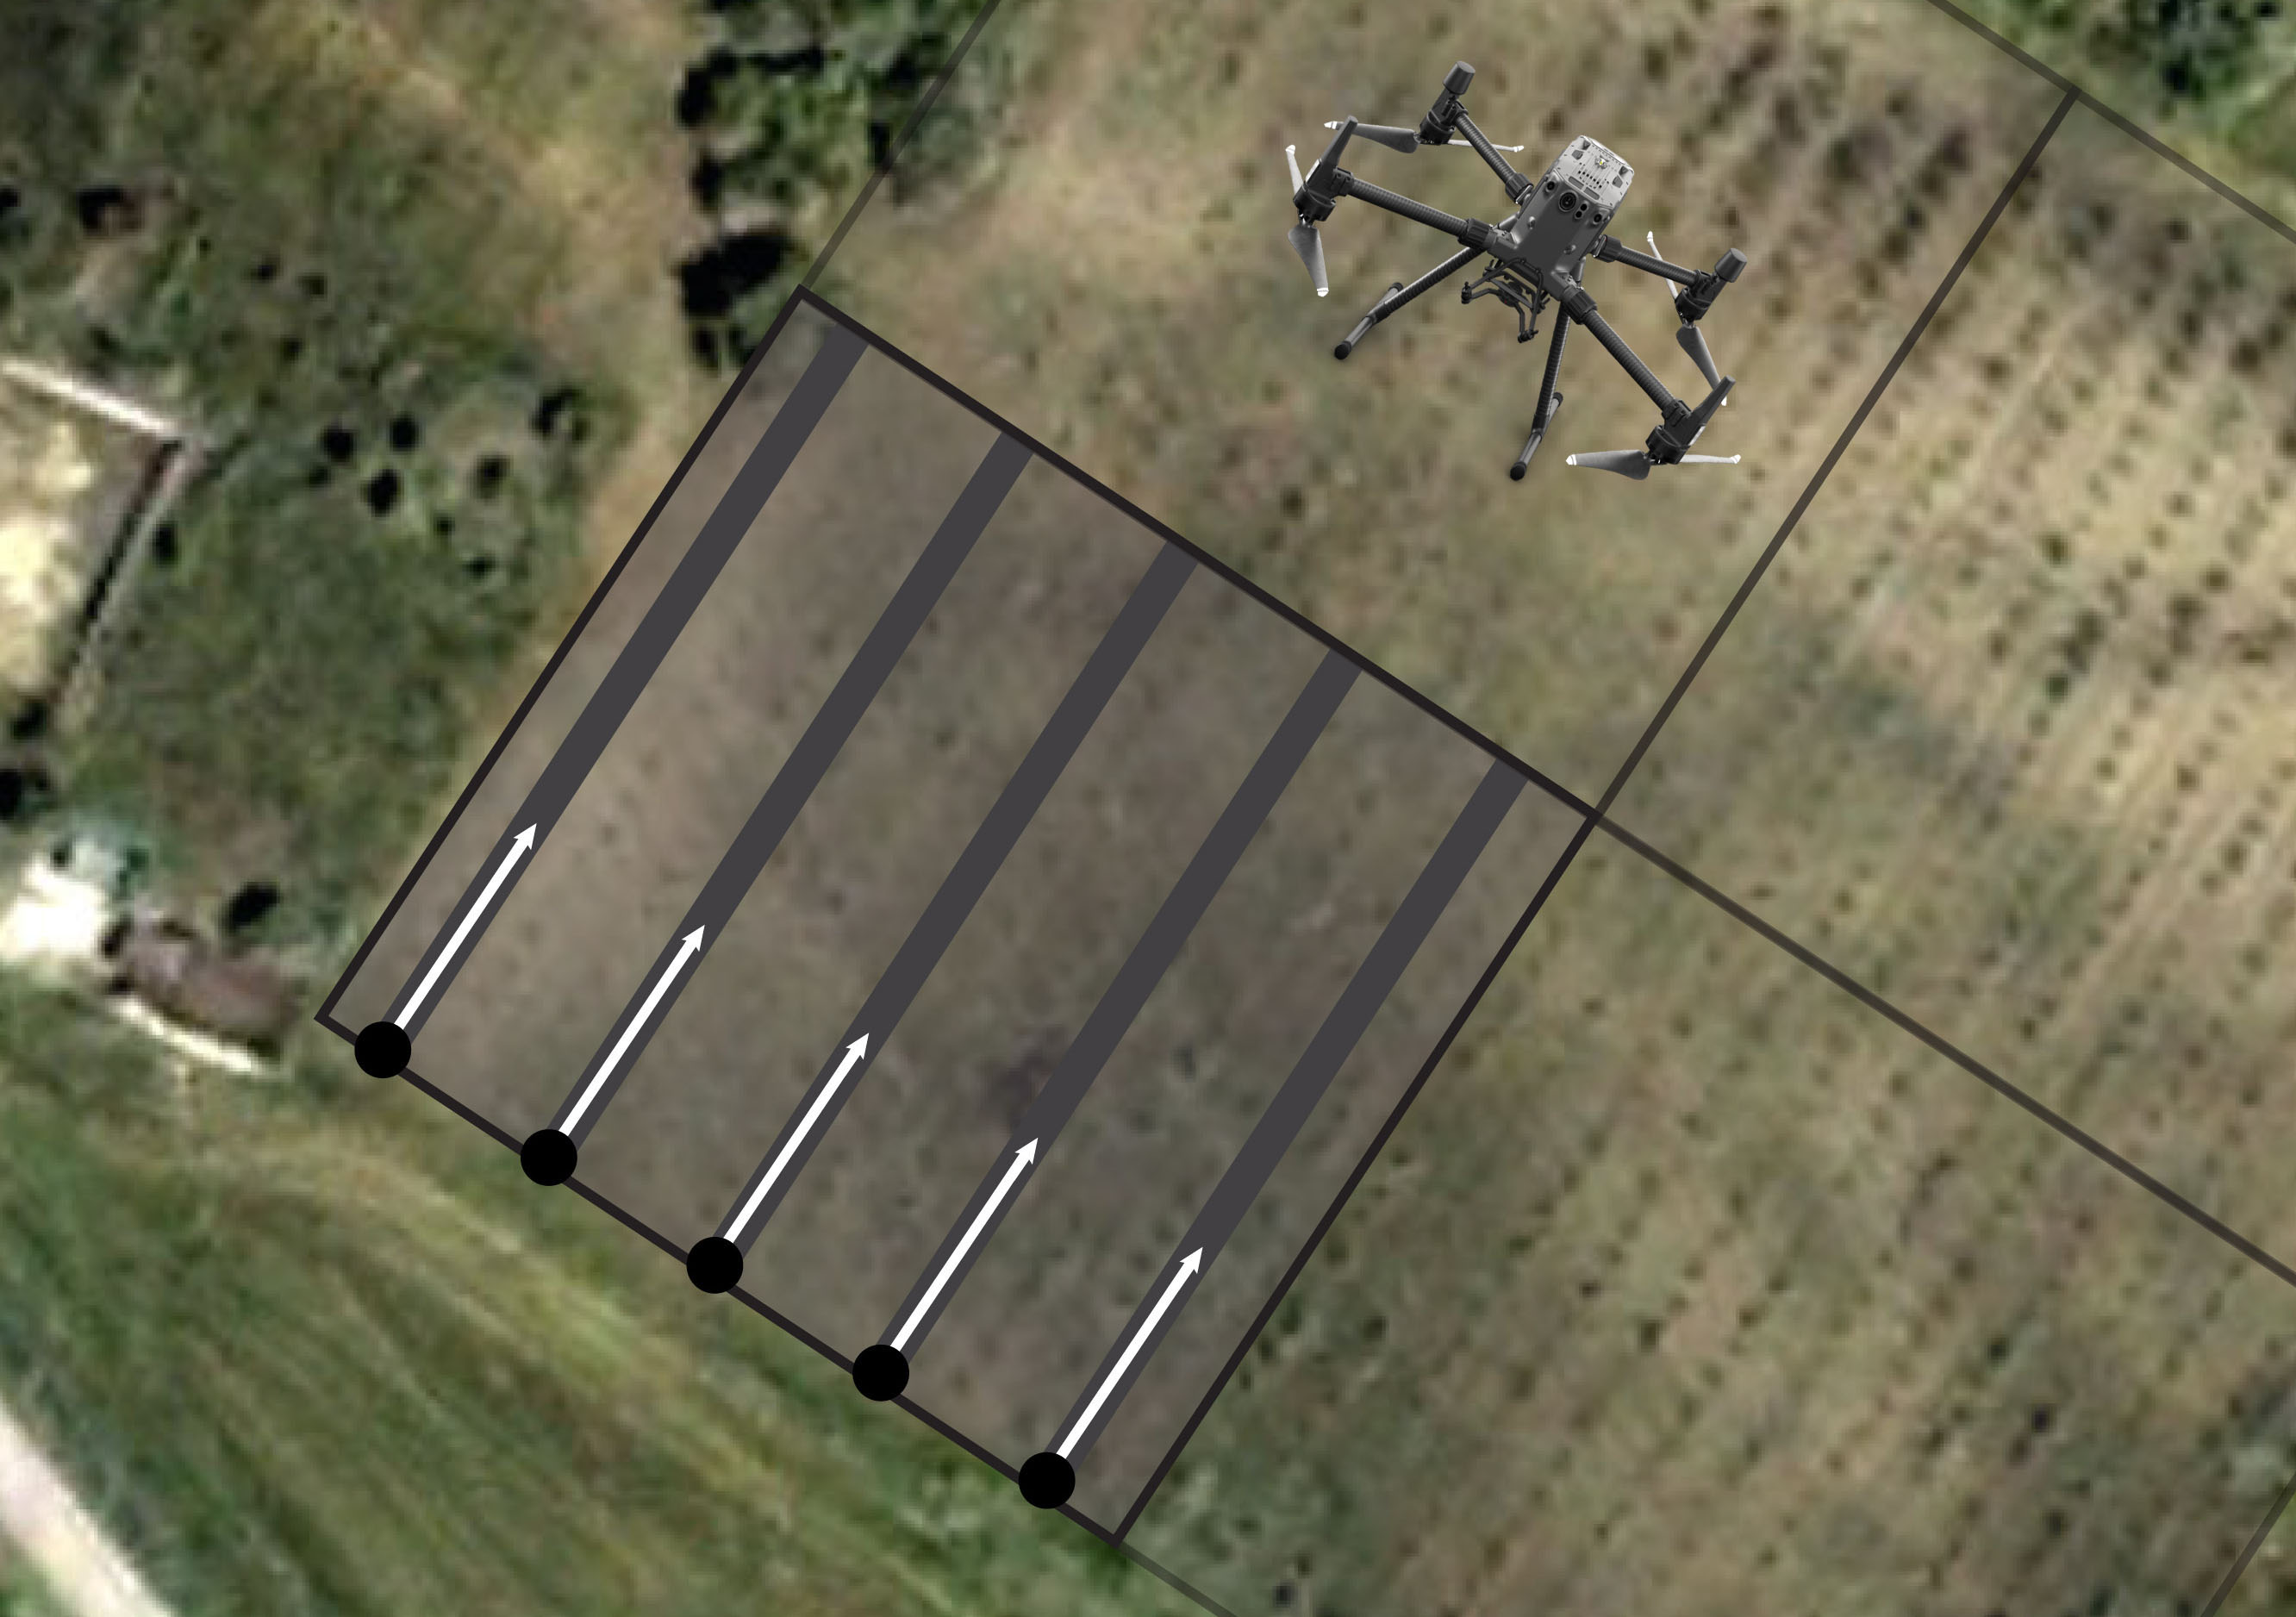 Archeological inspections using drone